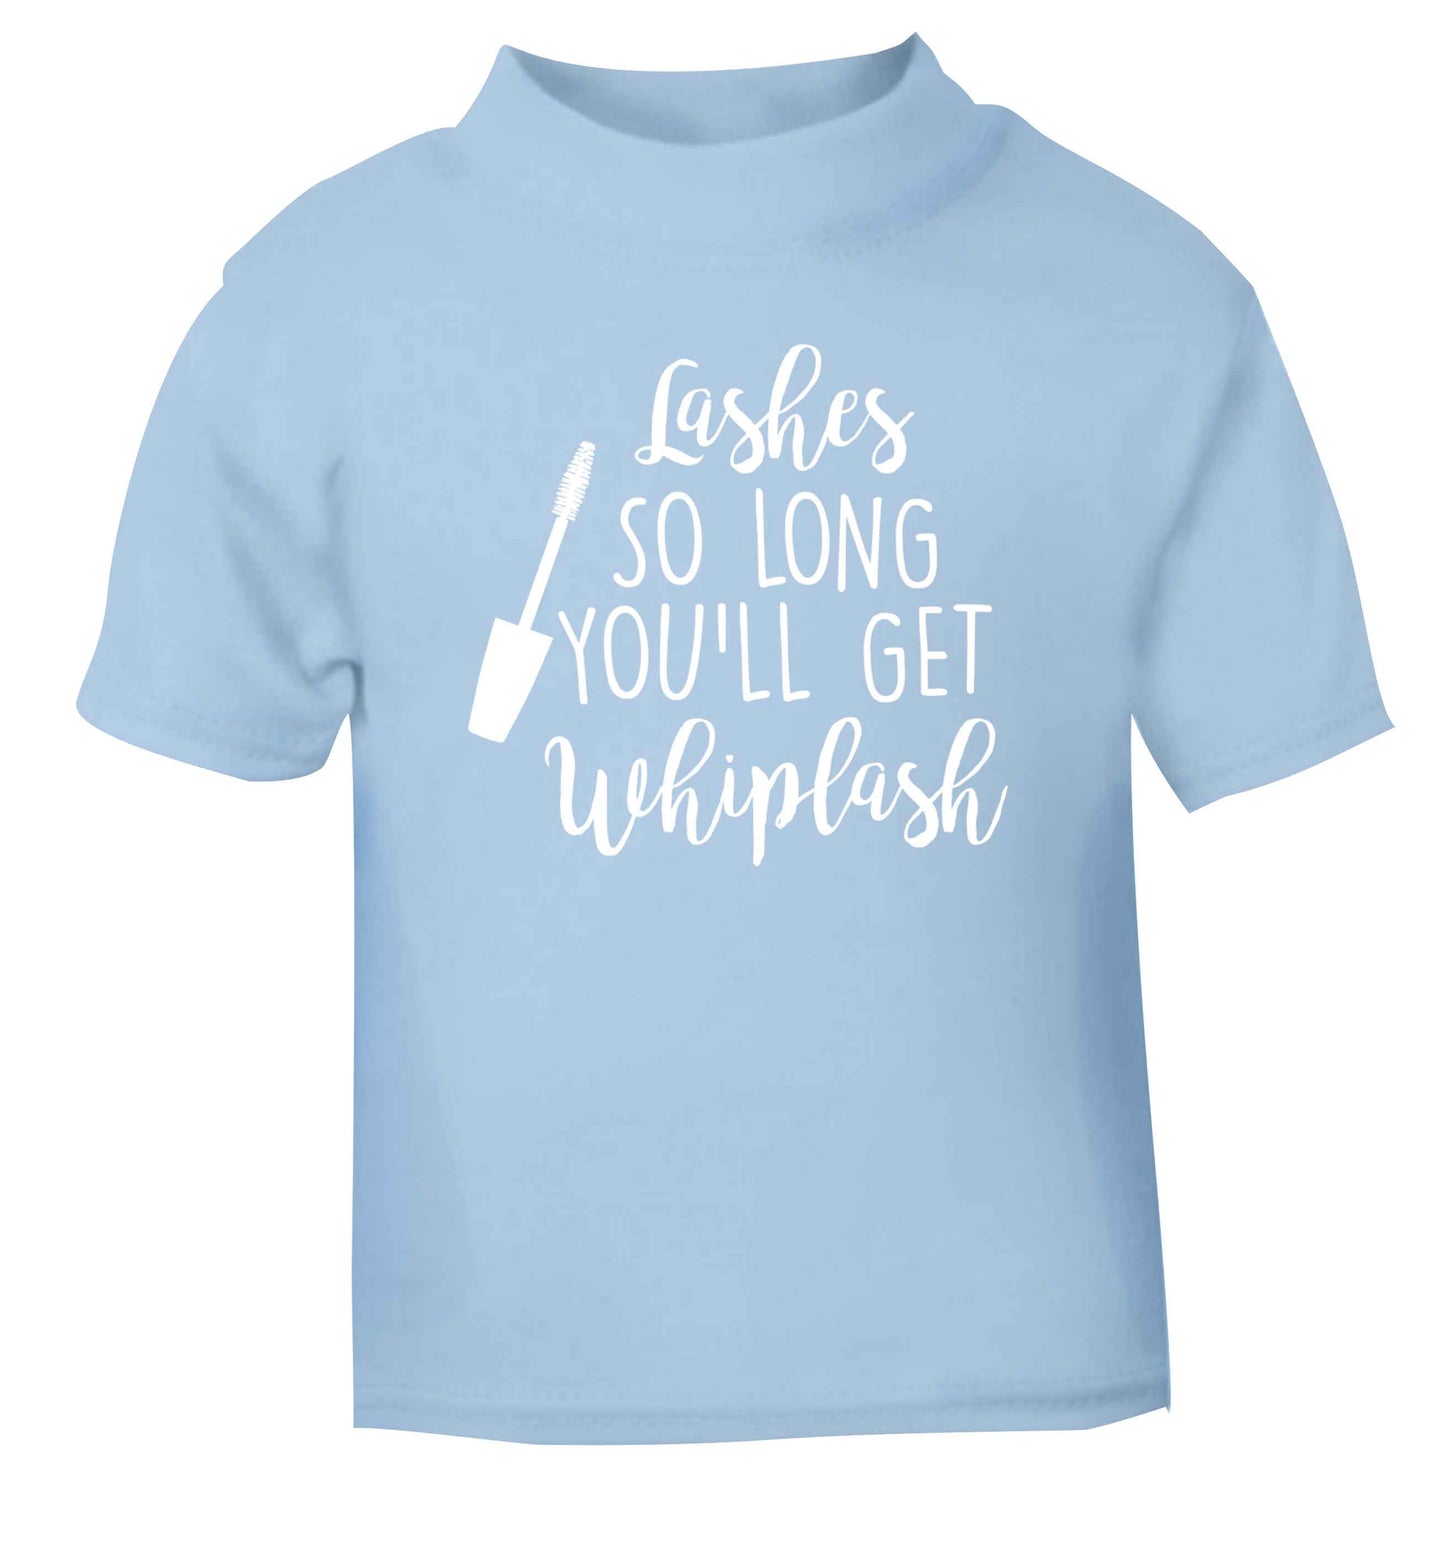 Lashes so long you'll get whiplash light blue Baby Toddler Tshirt 2 Years